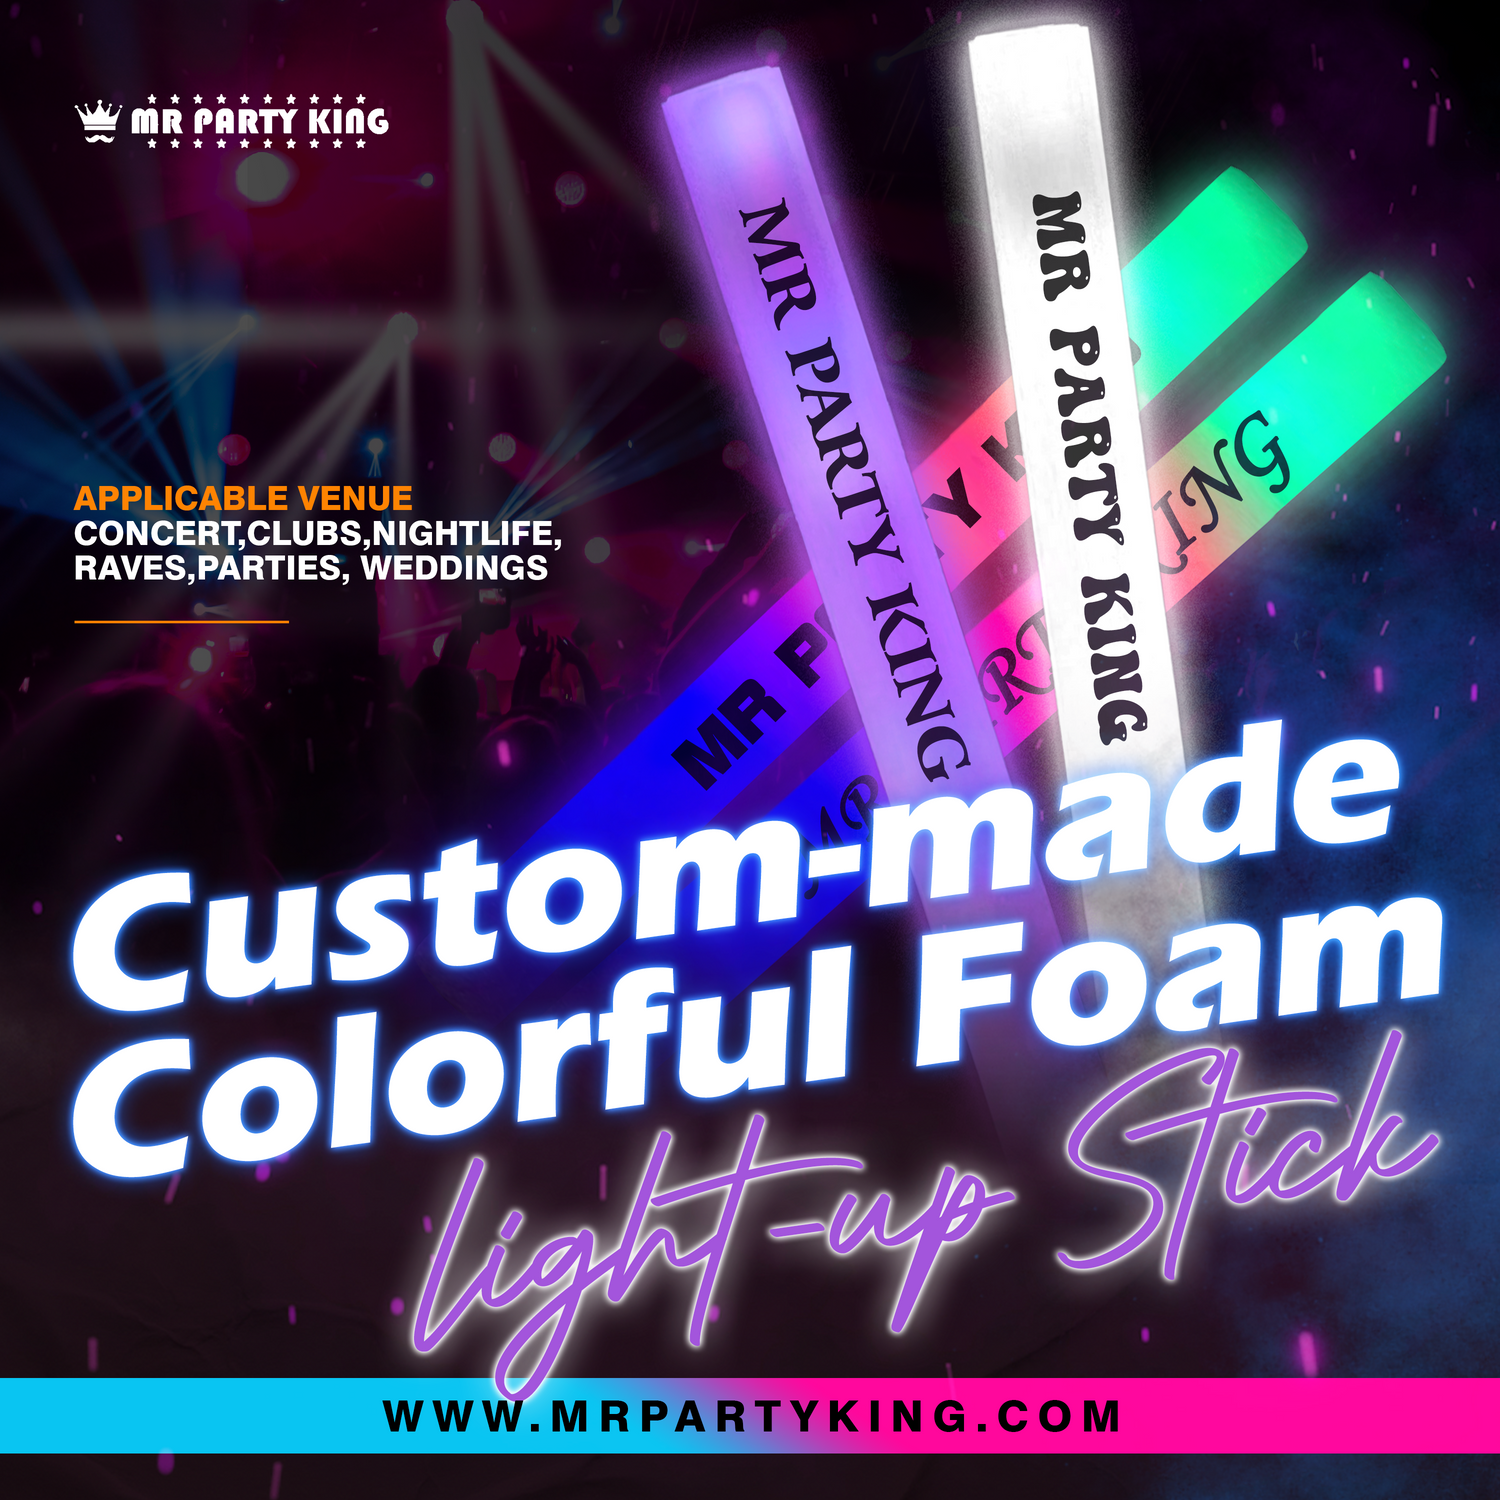 Mr Party King Pack of 100 Custom LED Party Foam Light Sticks Batons for  Wedding, Parties, Birthdays, Guests, Party, DJ, Concerts, Festivals,  Events